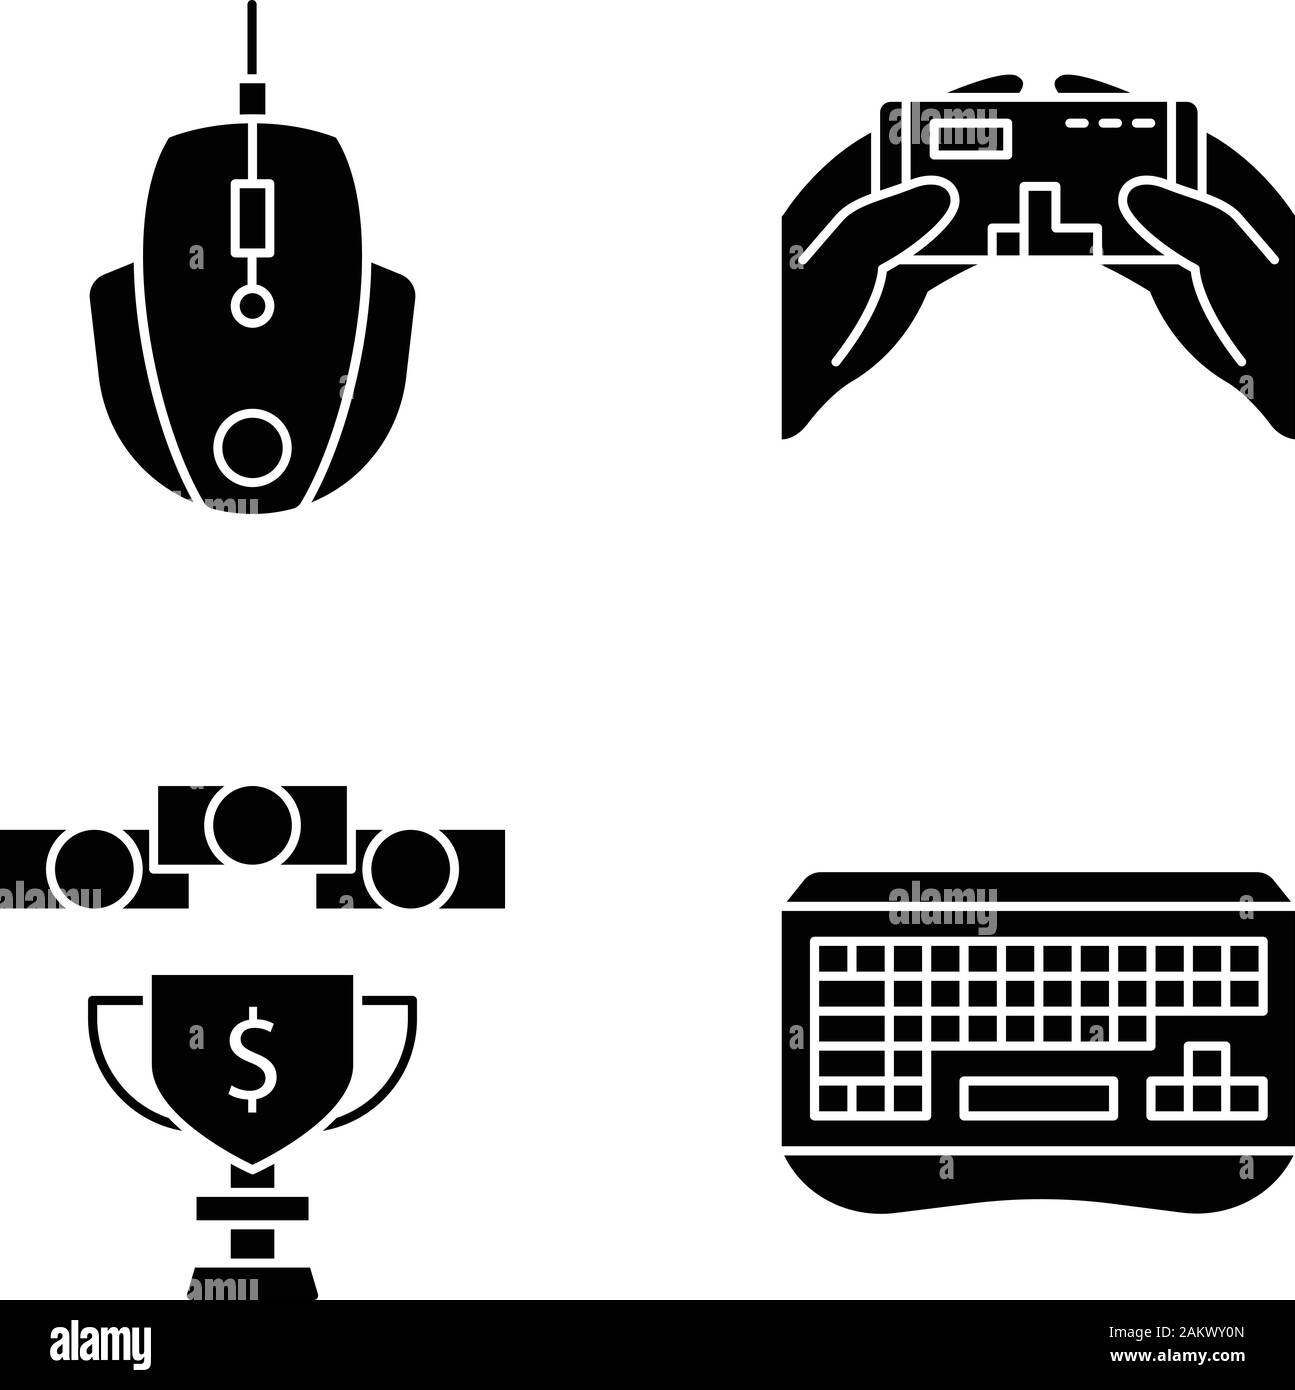 Esports glyph icons set. Gaming keyboard and mouse. Mobile game. Prize money. Silhouette symbols. Vector isolated illustration Stock Vector